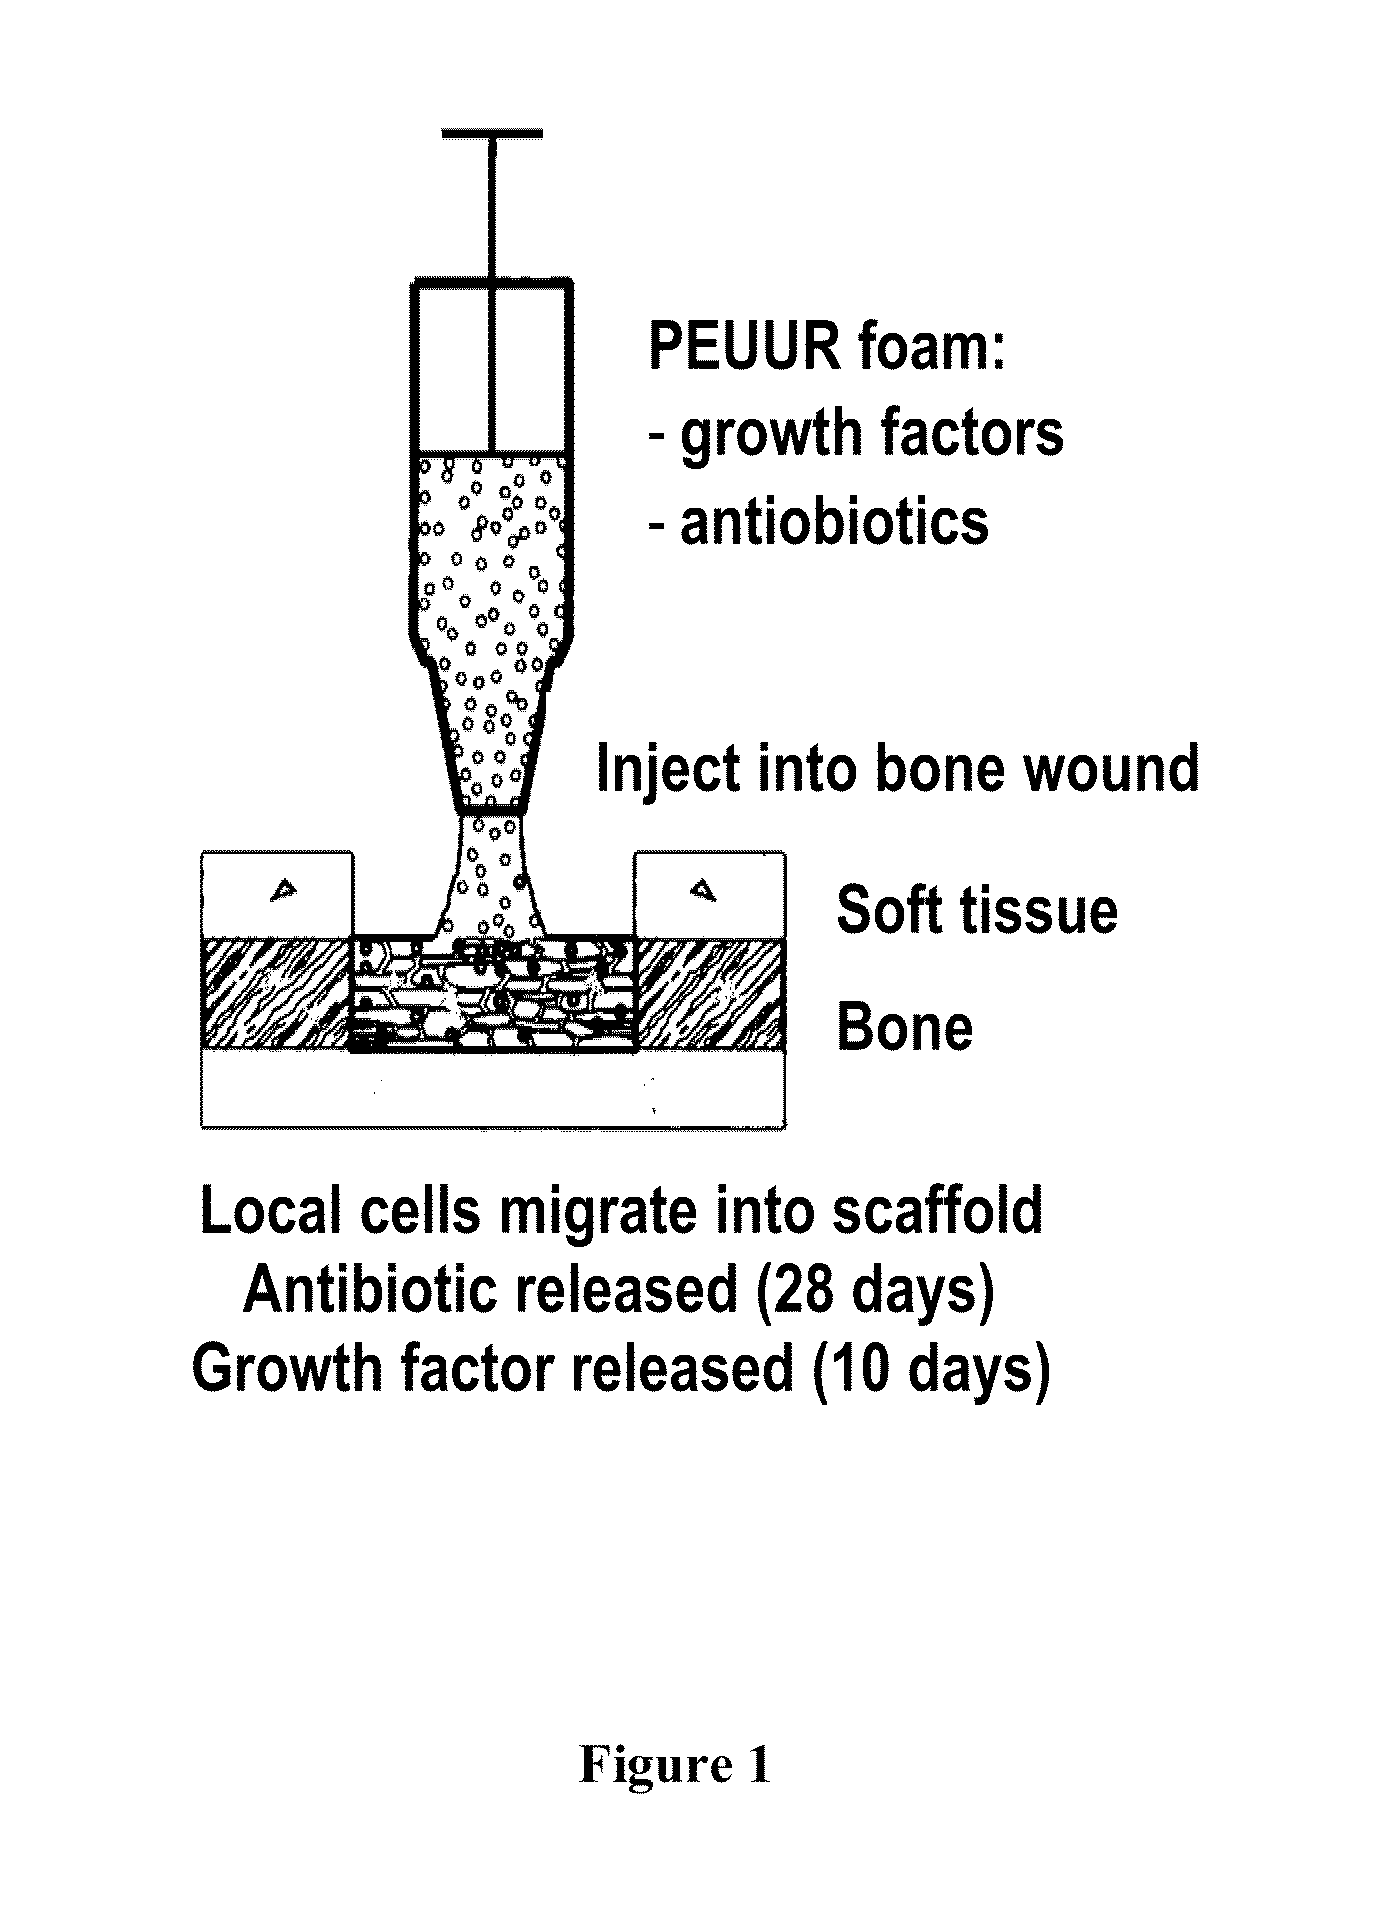 Injectable dual delivery allograph bone/polymer composite for treatment of open fractures